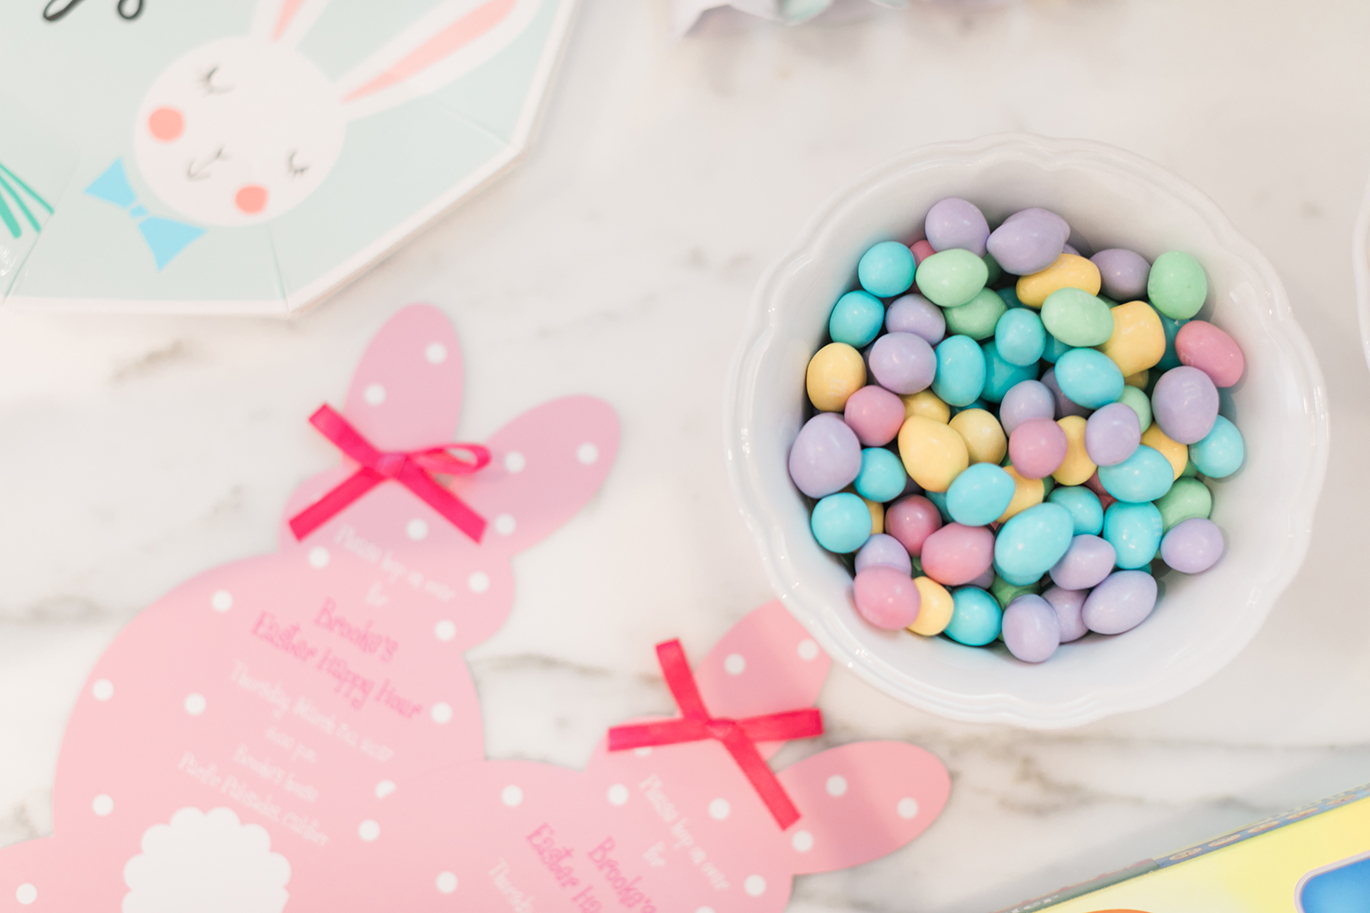 Easter party invitations